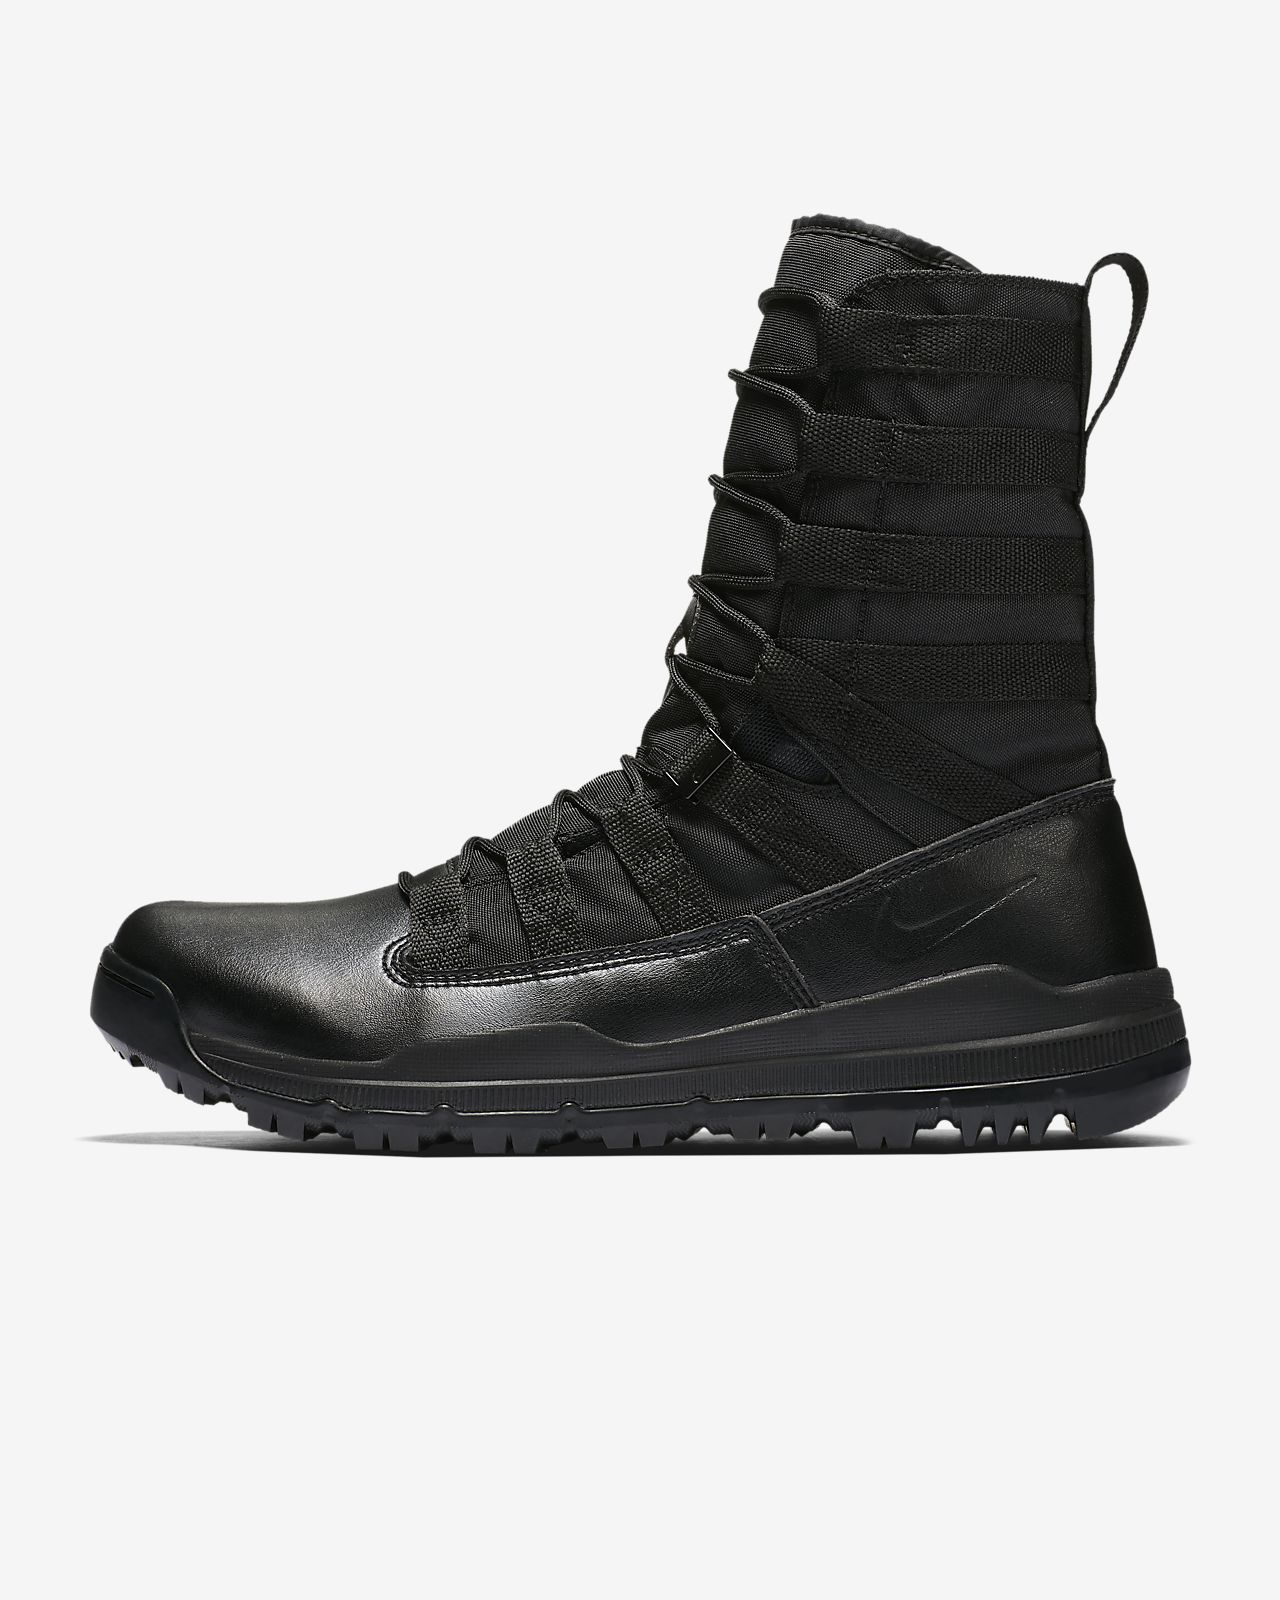 nike tactical boots near me